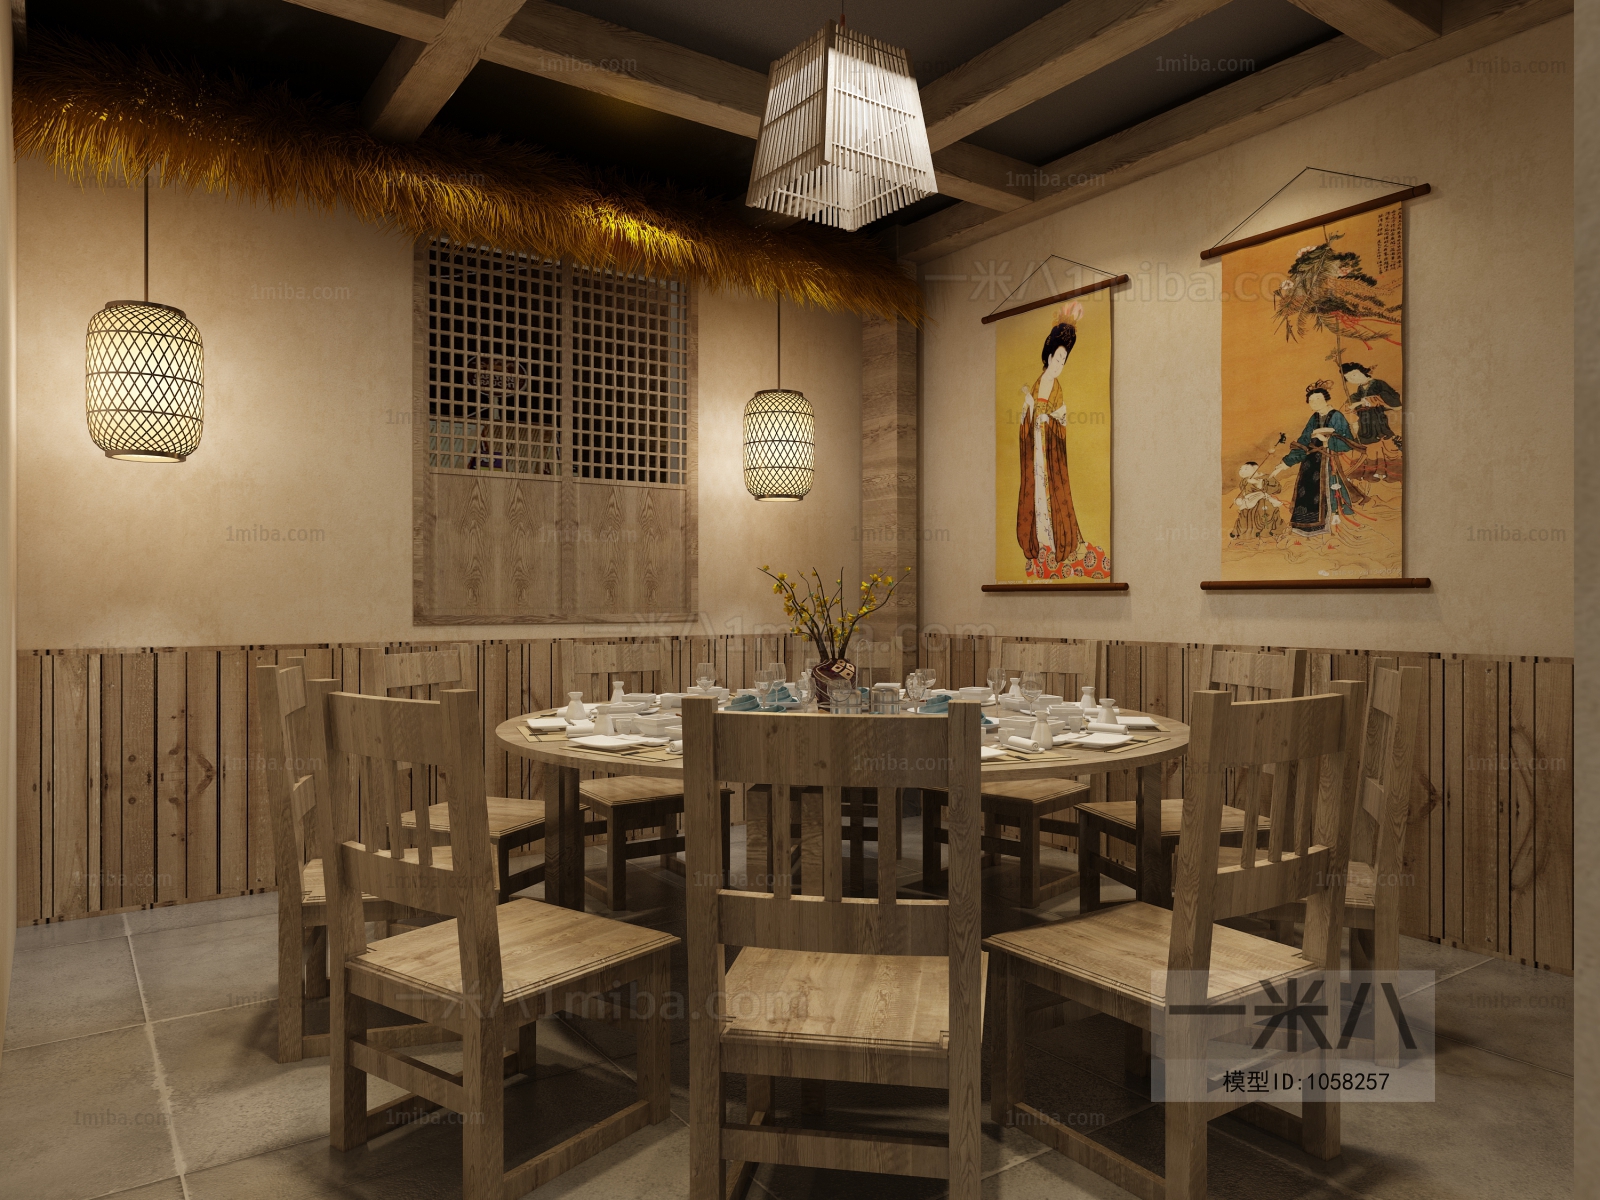 Chinese Style Country Style Restaurant